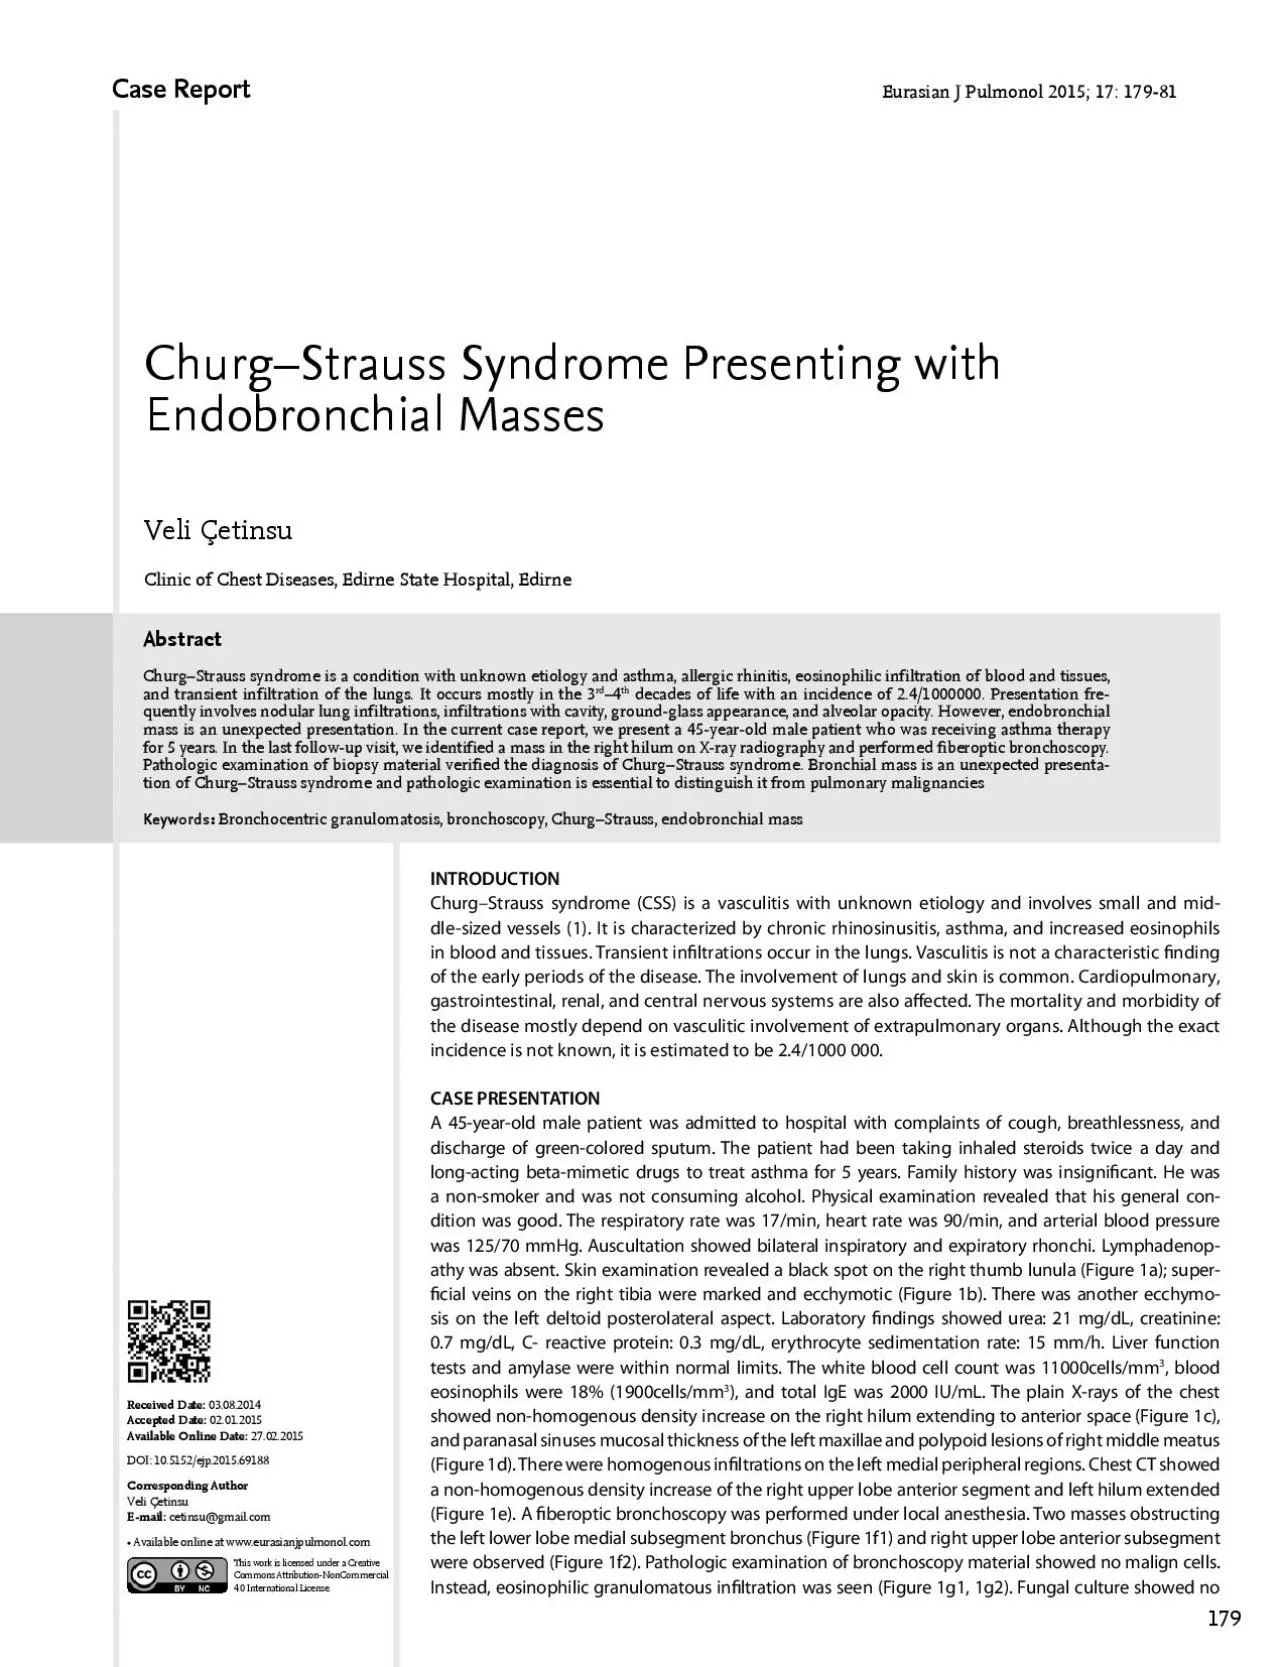 ChurgStrauss syndrome is a condition with unknown etiology and asth